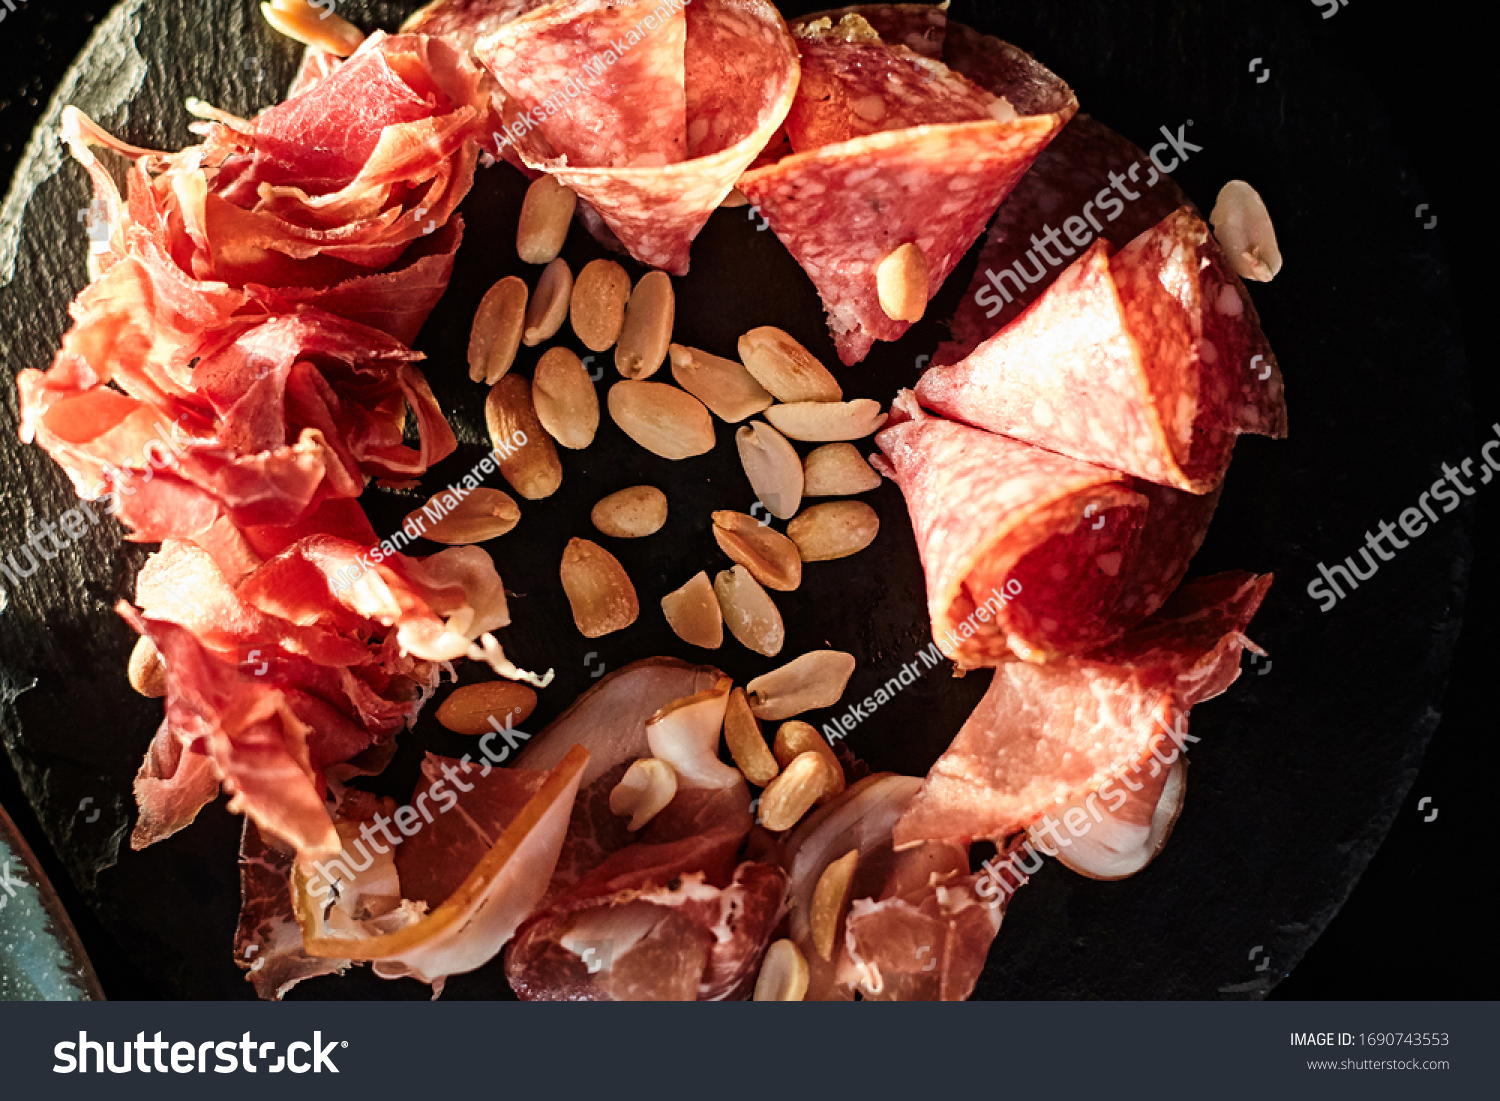 sliced meat and peanuts on a board #1690743553